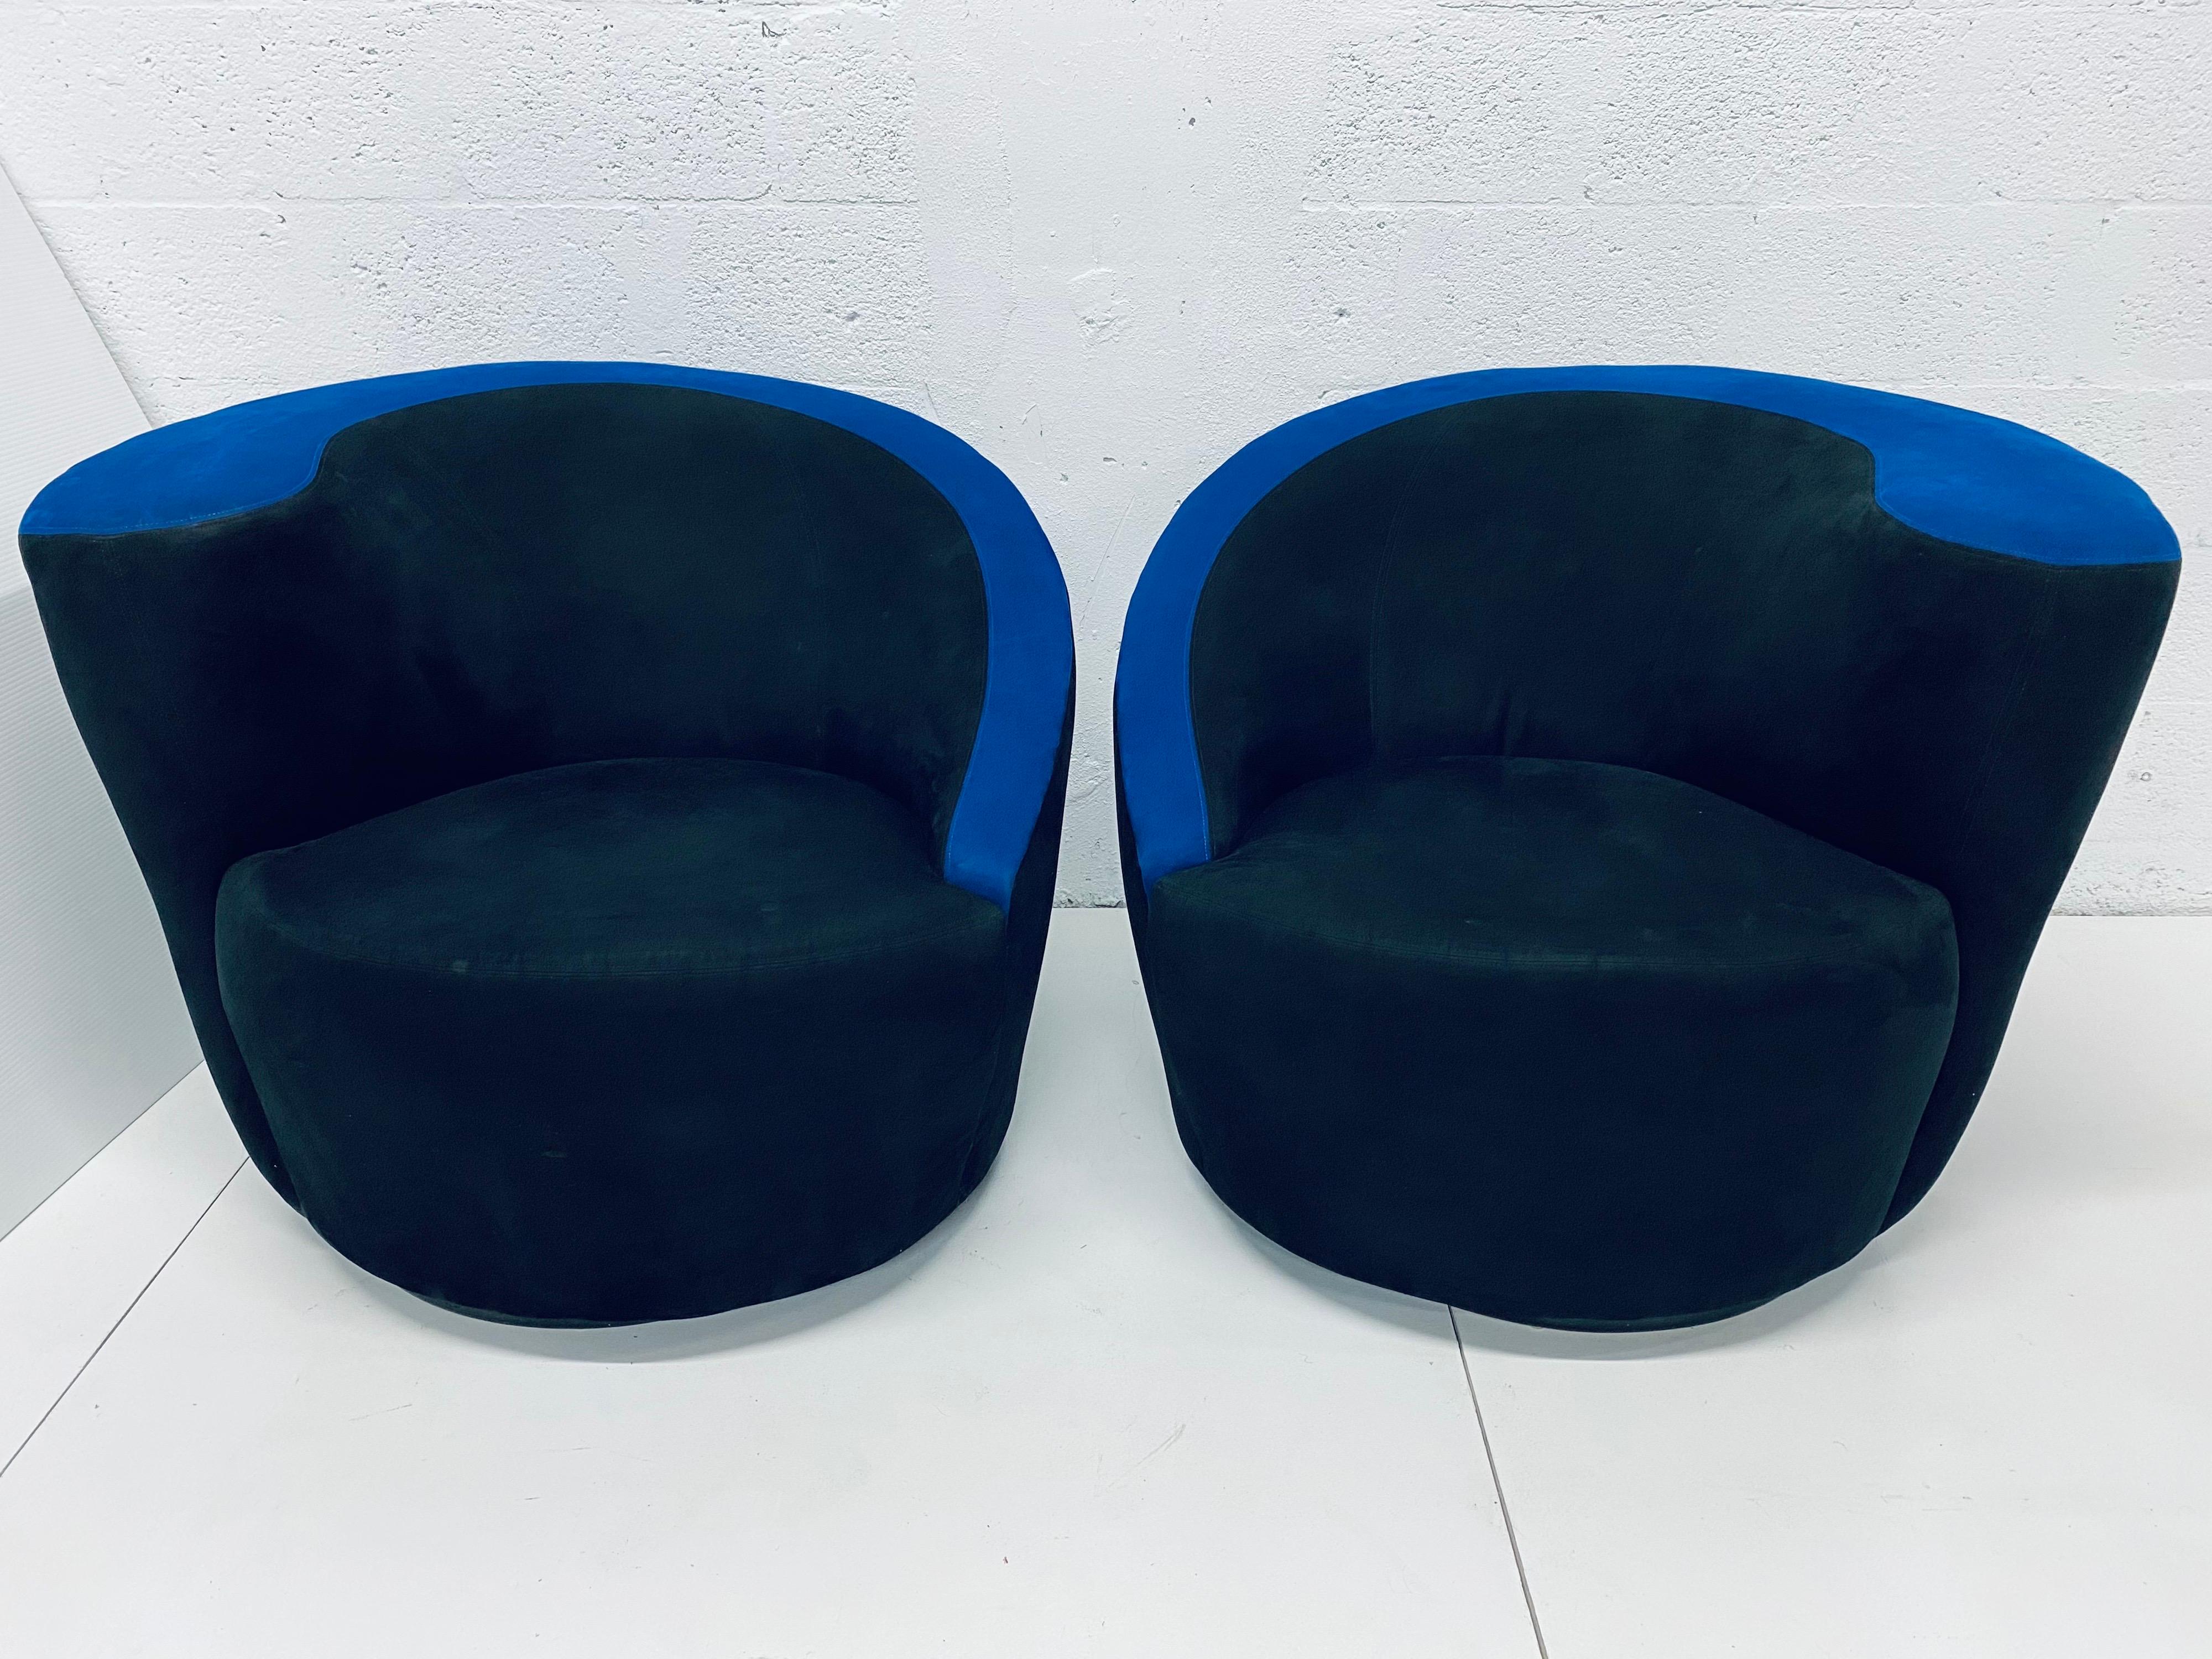 Pair of vintage black and blue ultra suede swivel club chairs by Vladimir Kagan for Directional. Swivel bases are wrapped in ultra suede and maintains Directional labels. Use with original fabric or have reupholstered.